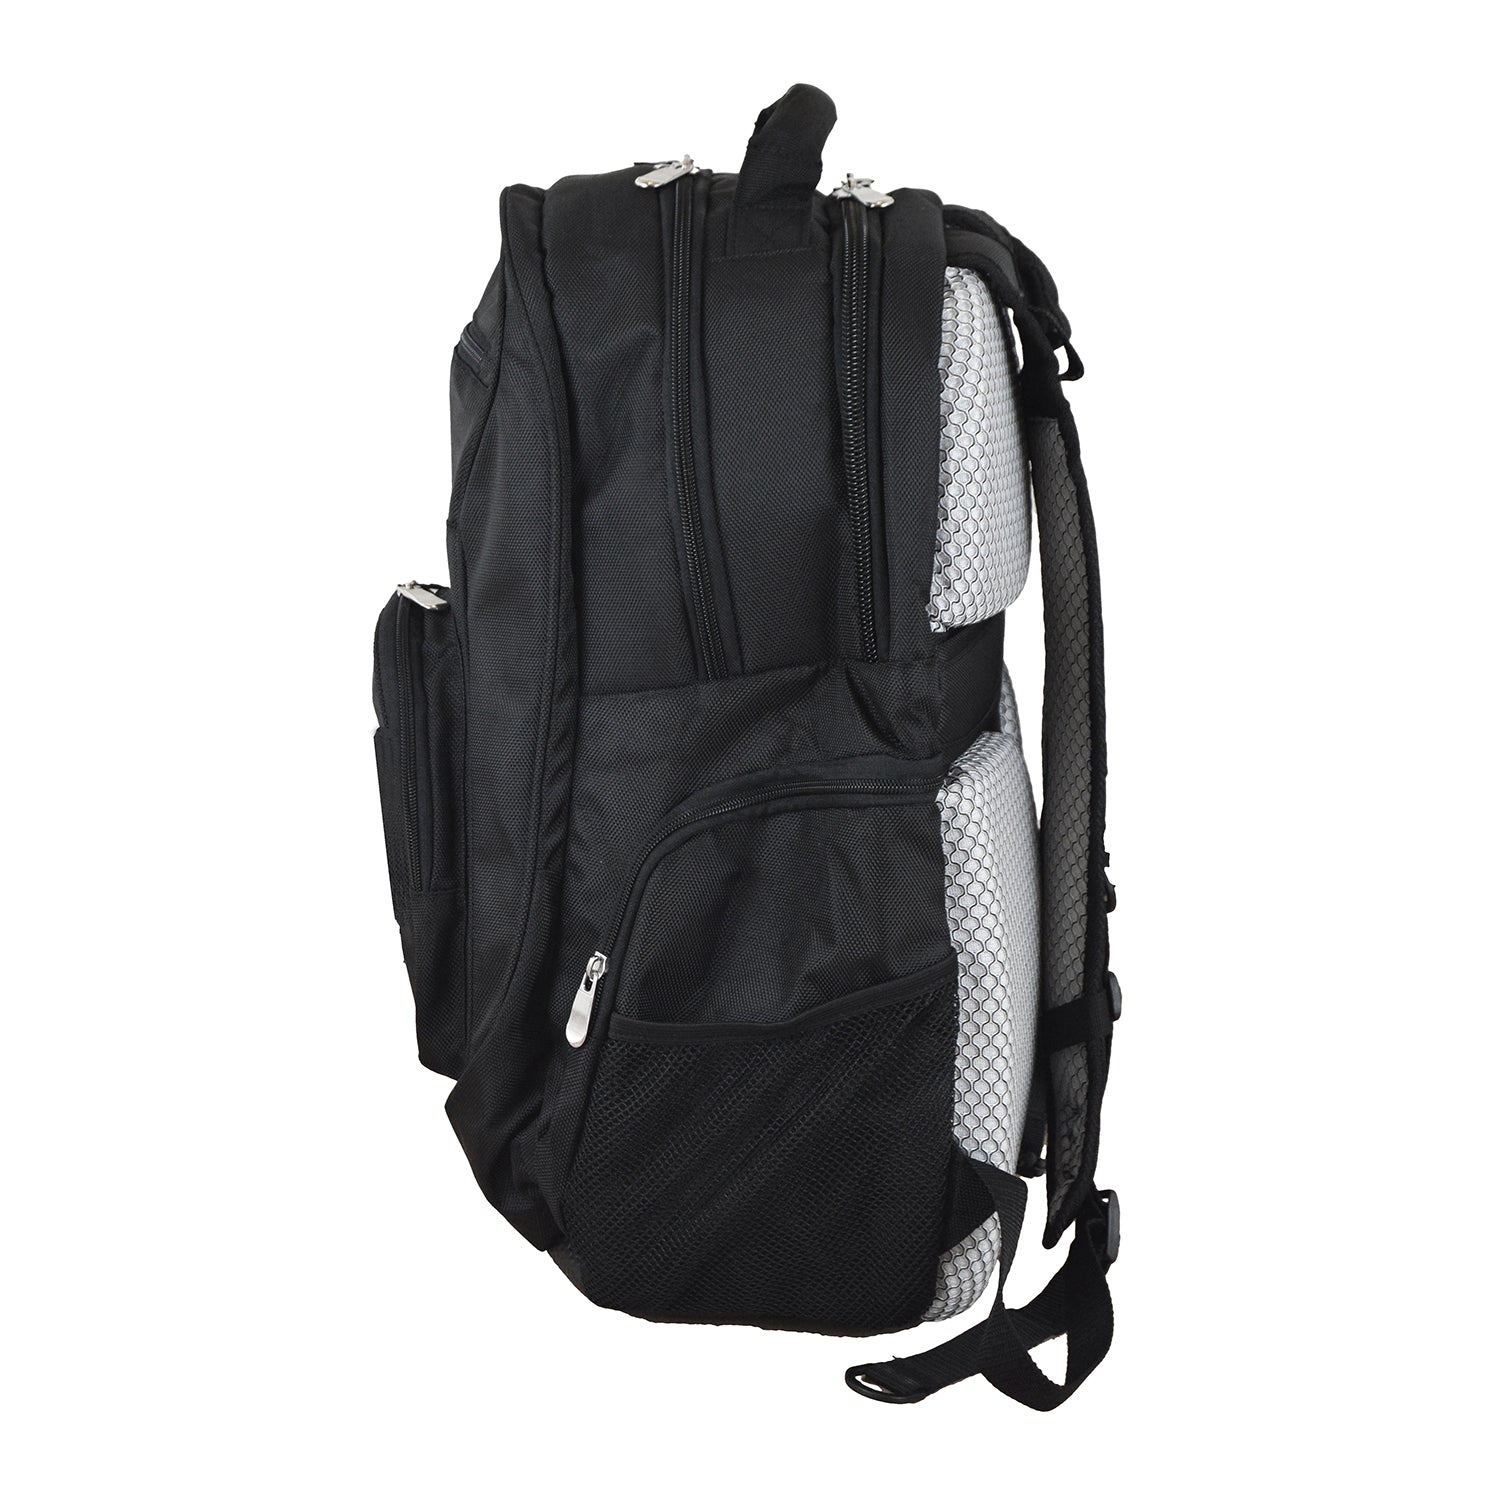 Team Australia Premium Laptop Backpack - Fits Most 17 Inch Laptops and Tablets - Ideal for Work, Travel, School, College, and Commuting